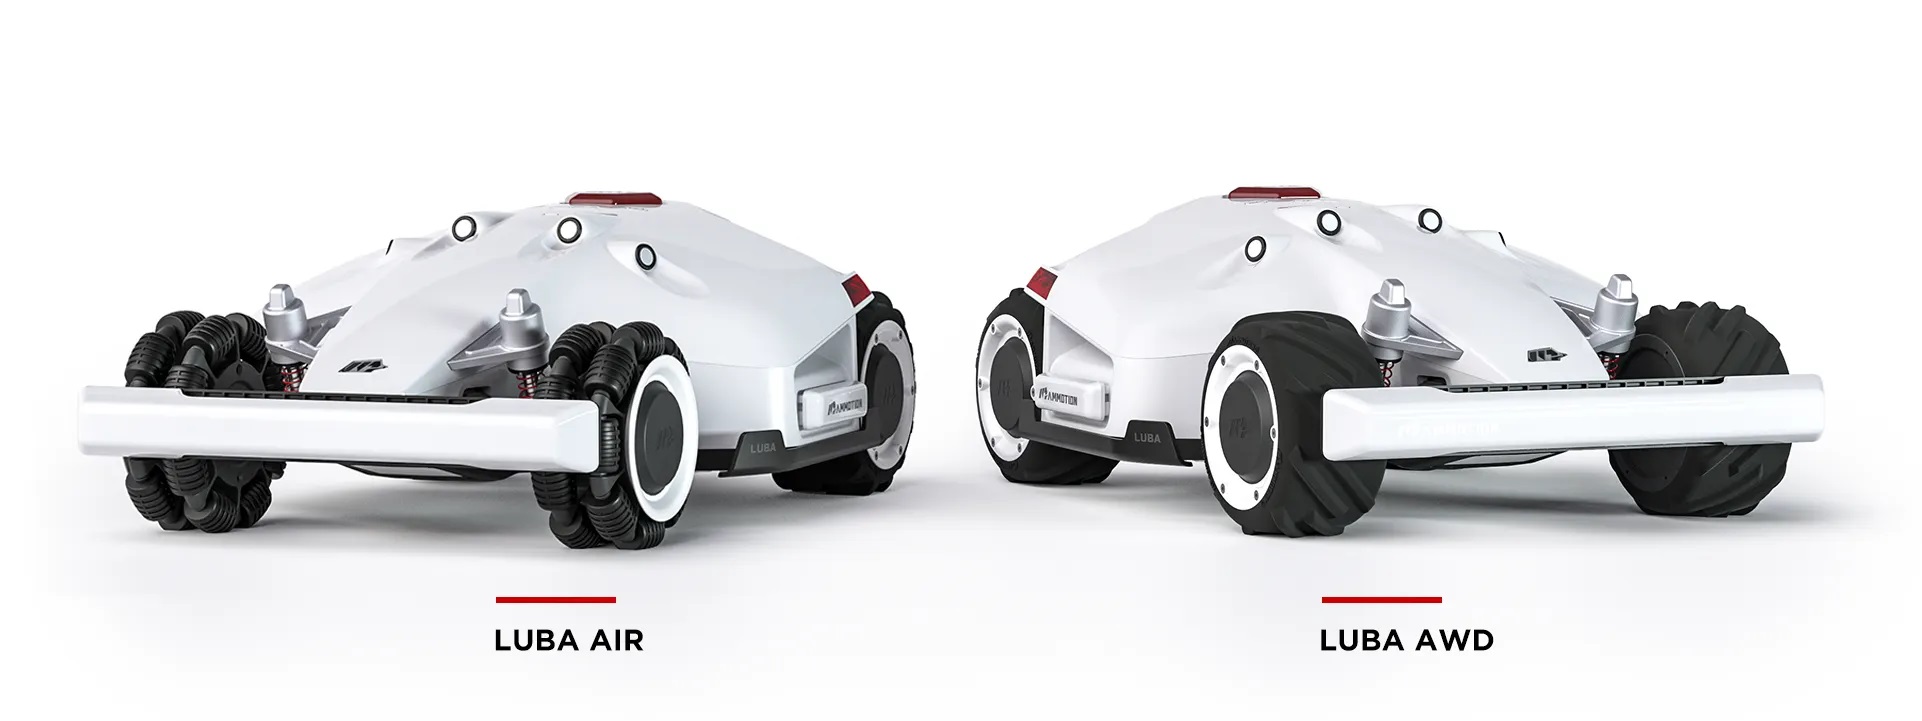 Mammotion Launches LUBA Robotic Lawn Mower for Residential Market